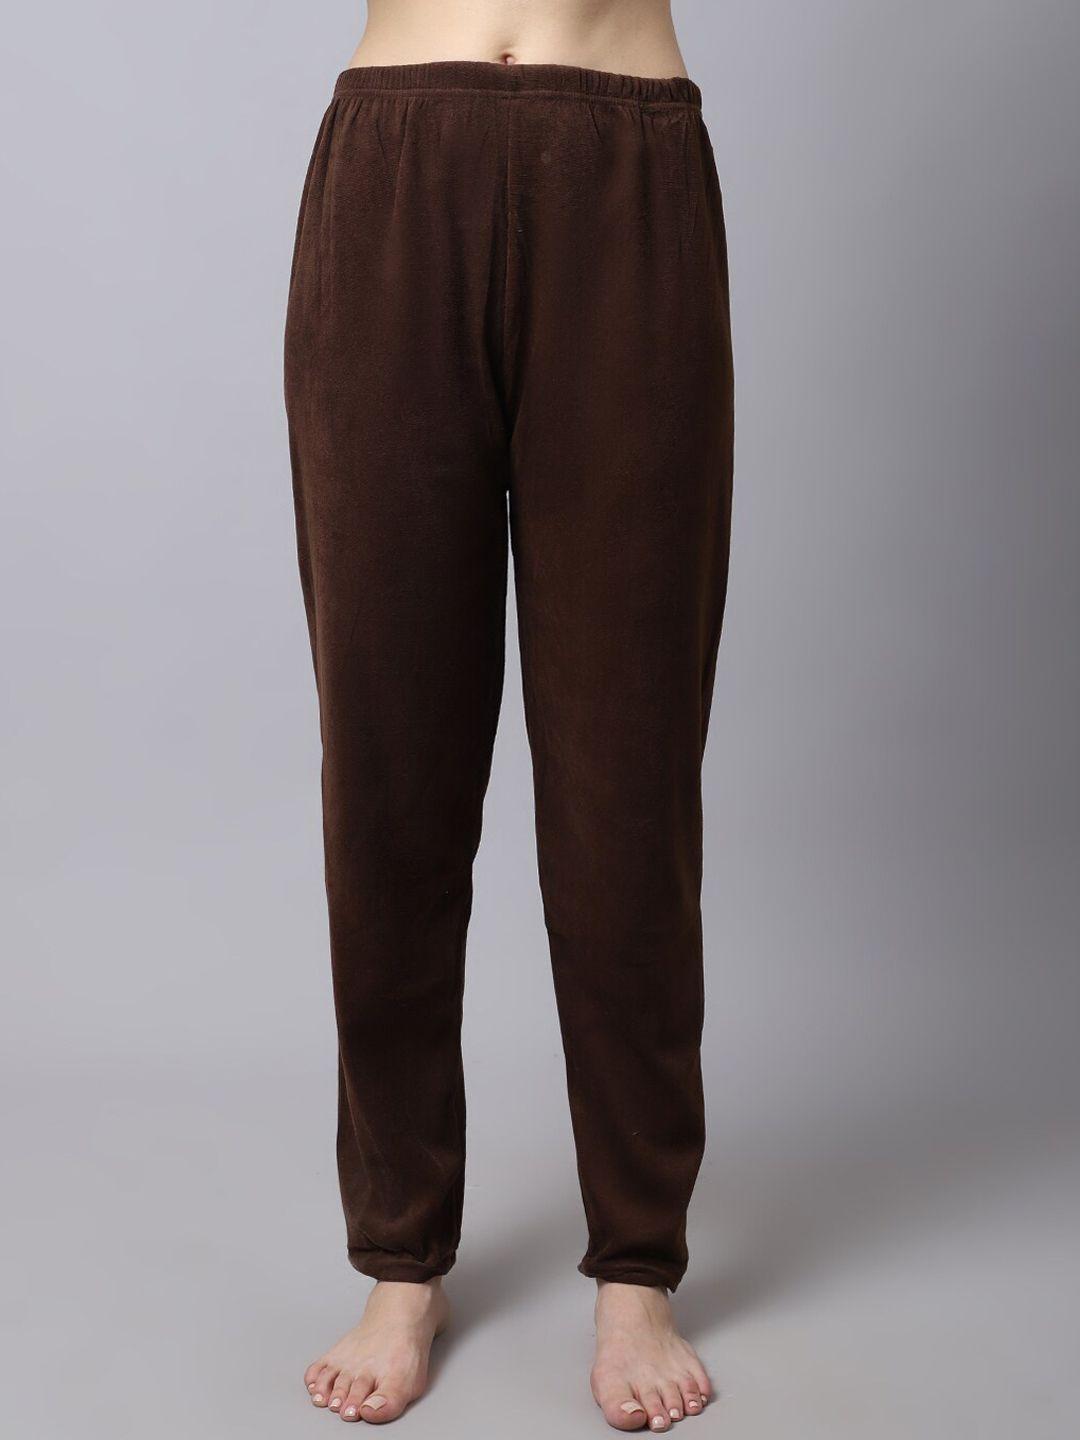 tag 7 women brown solid lounge pants